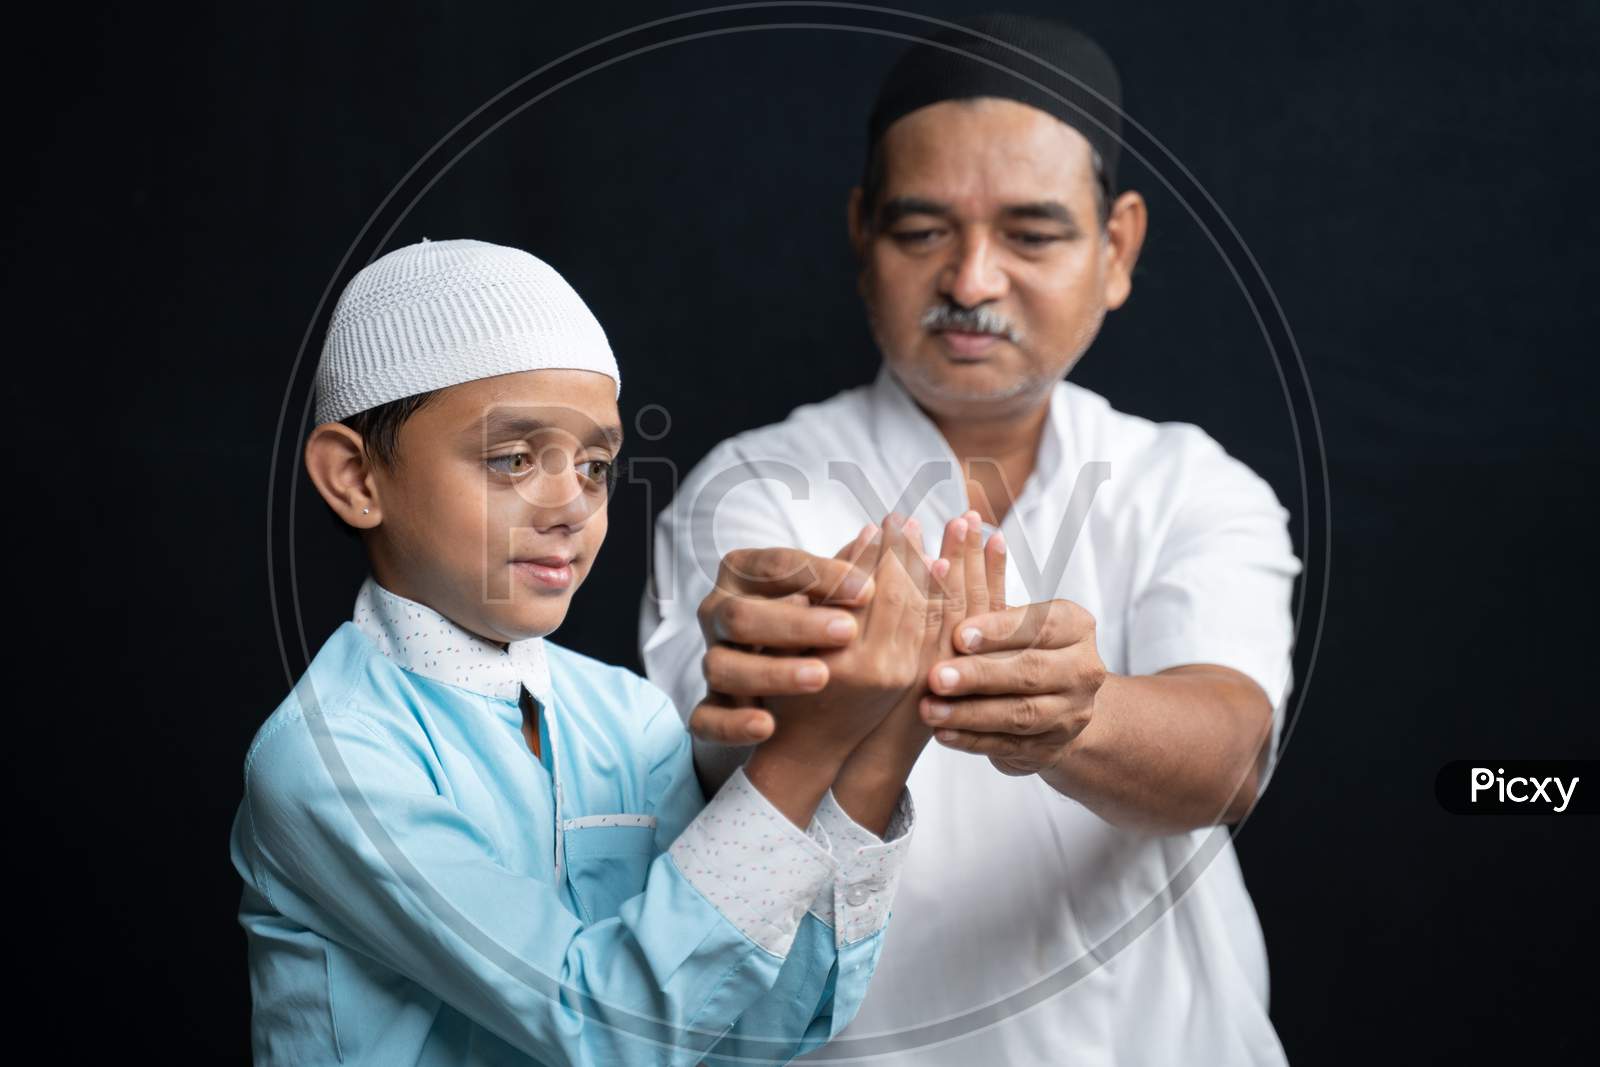 Muslim Father Teaching His Son How To Do Salah Or Payer In A Islamic Way.